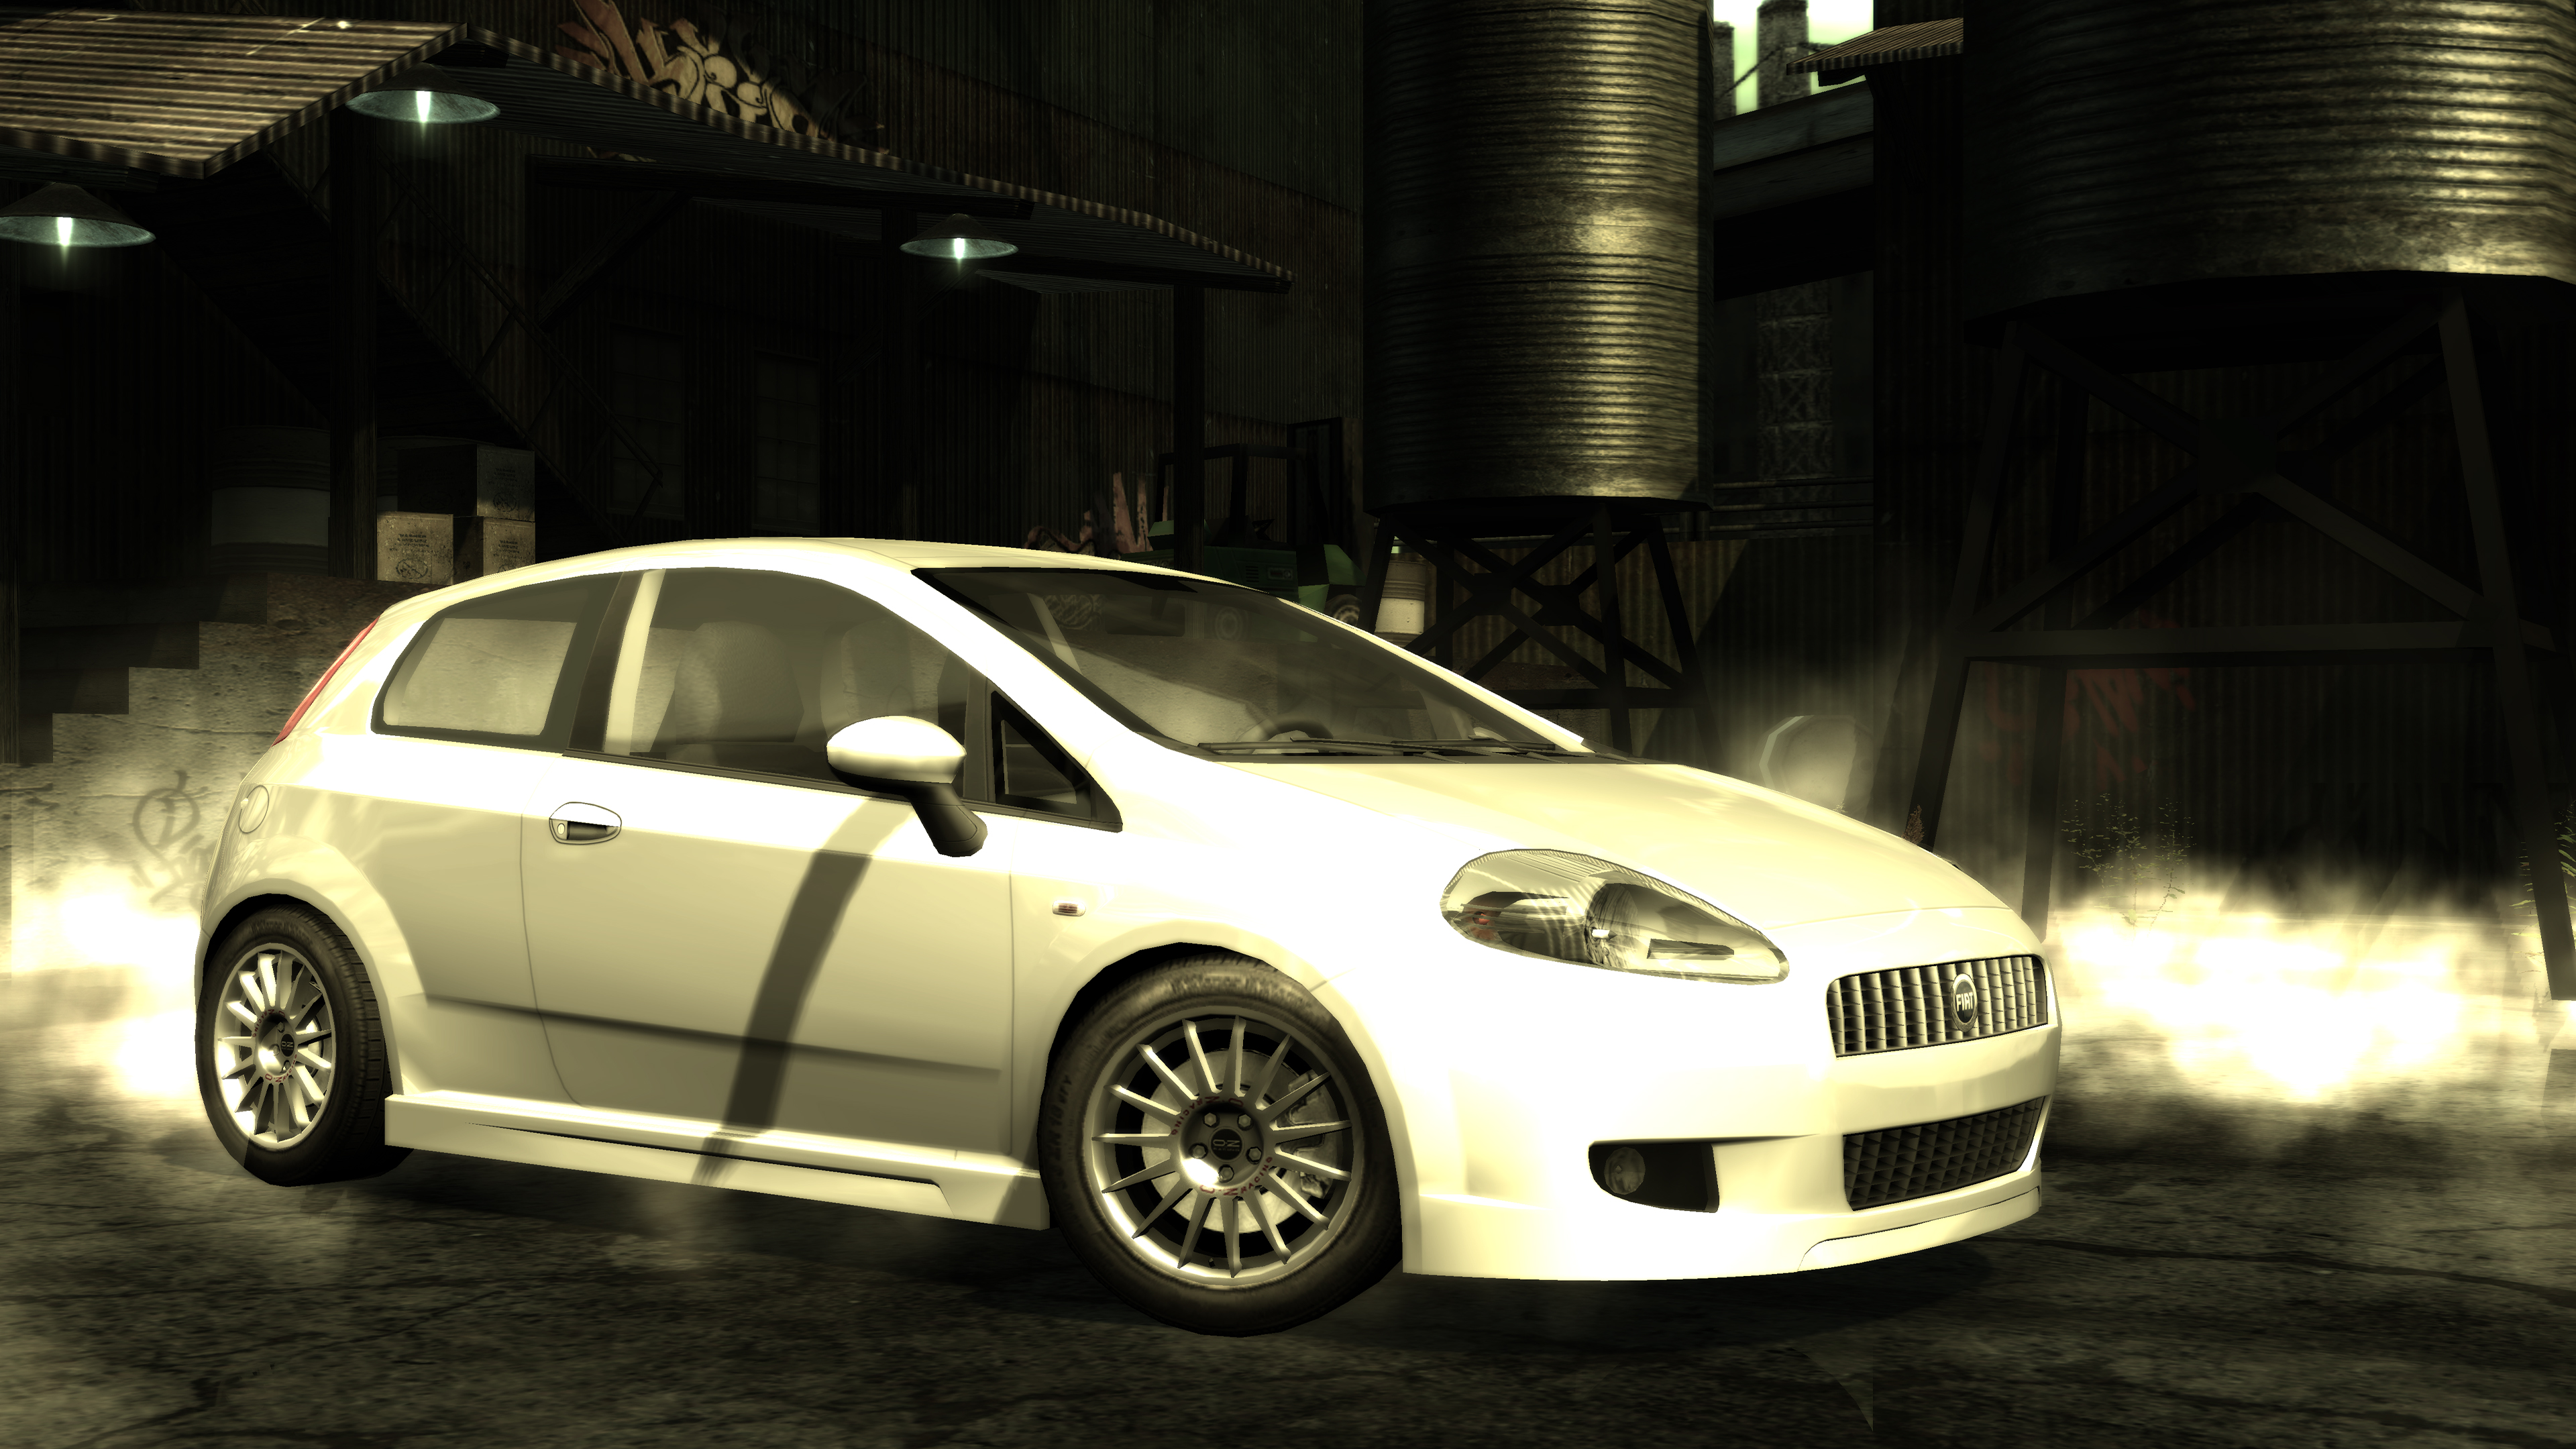 Fiat Punto, Need for Speed Wiki